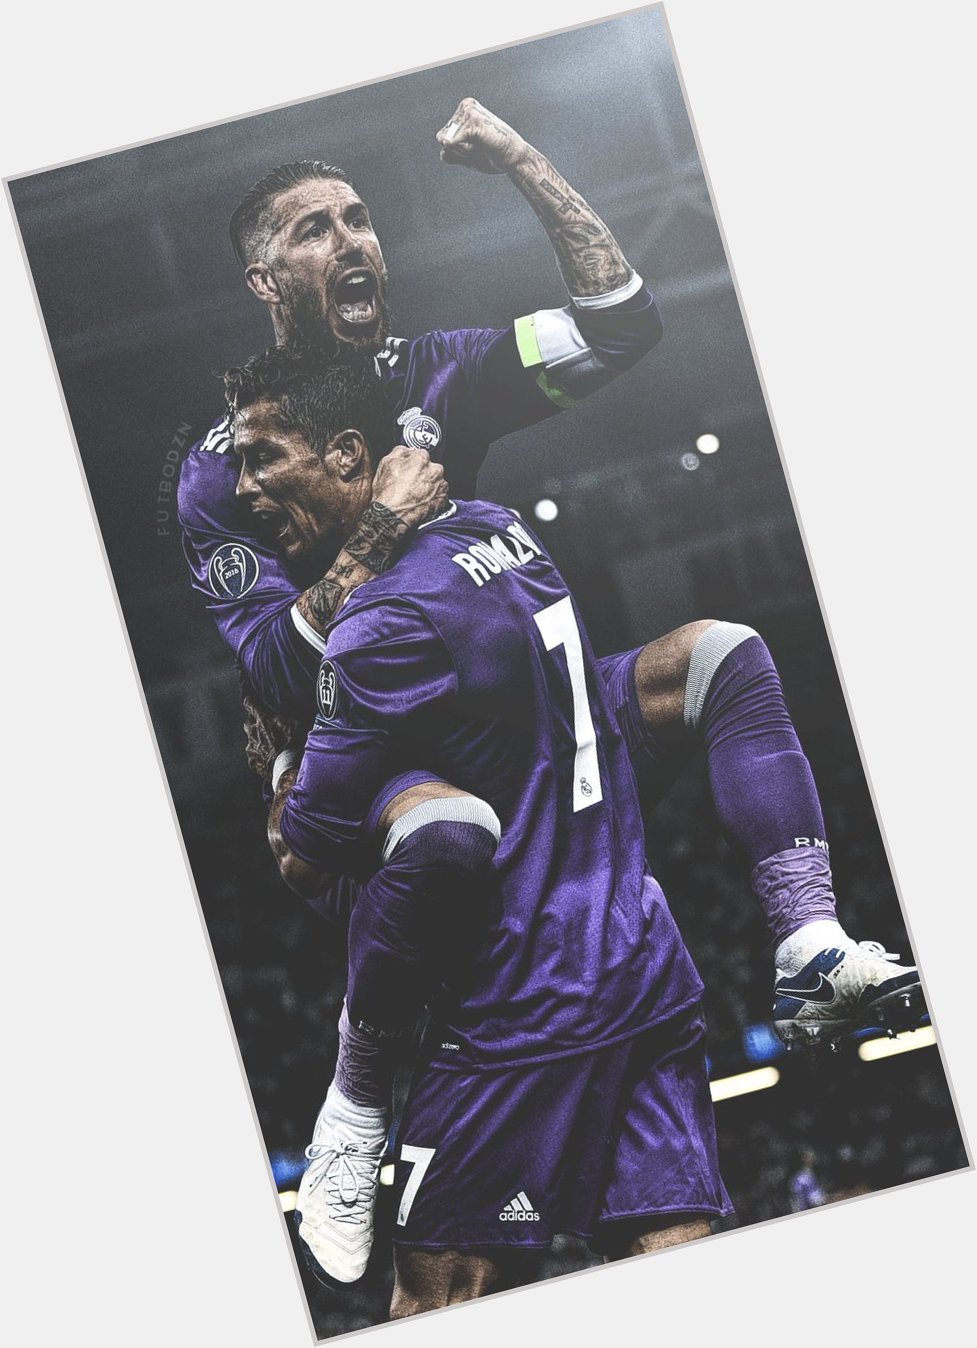 One of the greatest defenders of all time.

Happy Birthday to Cristiano\s former teammate, 

SERGIO RAMOS! 